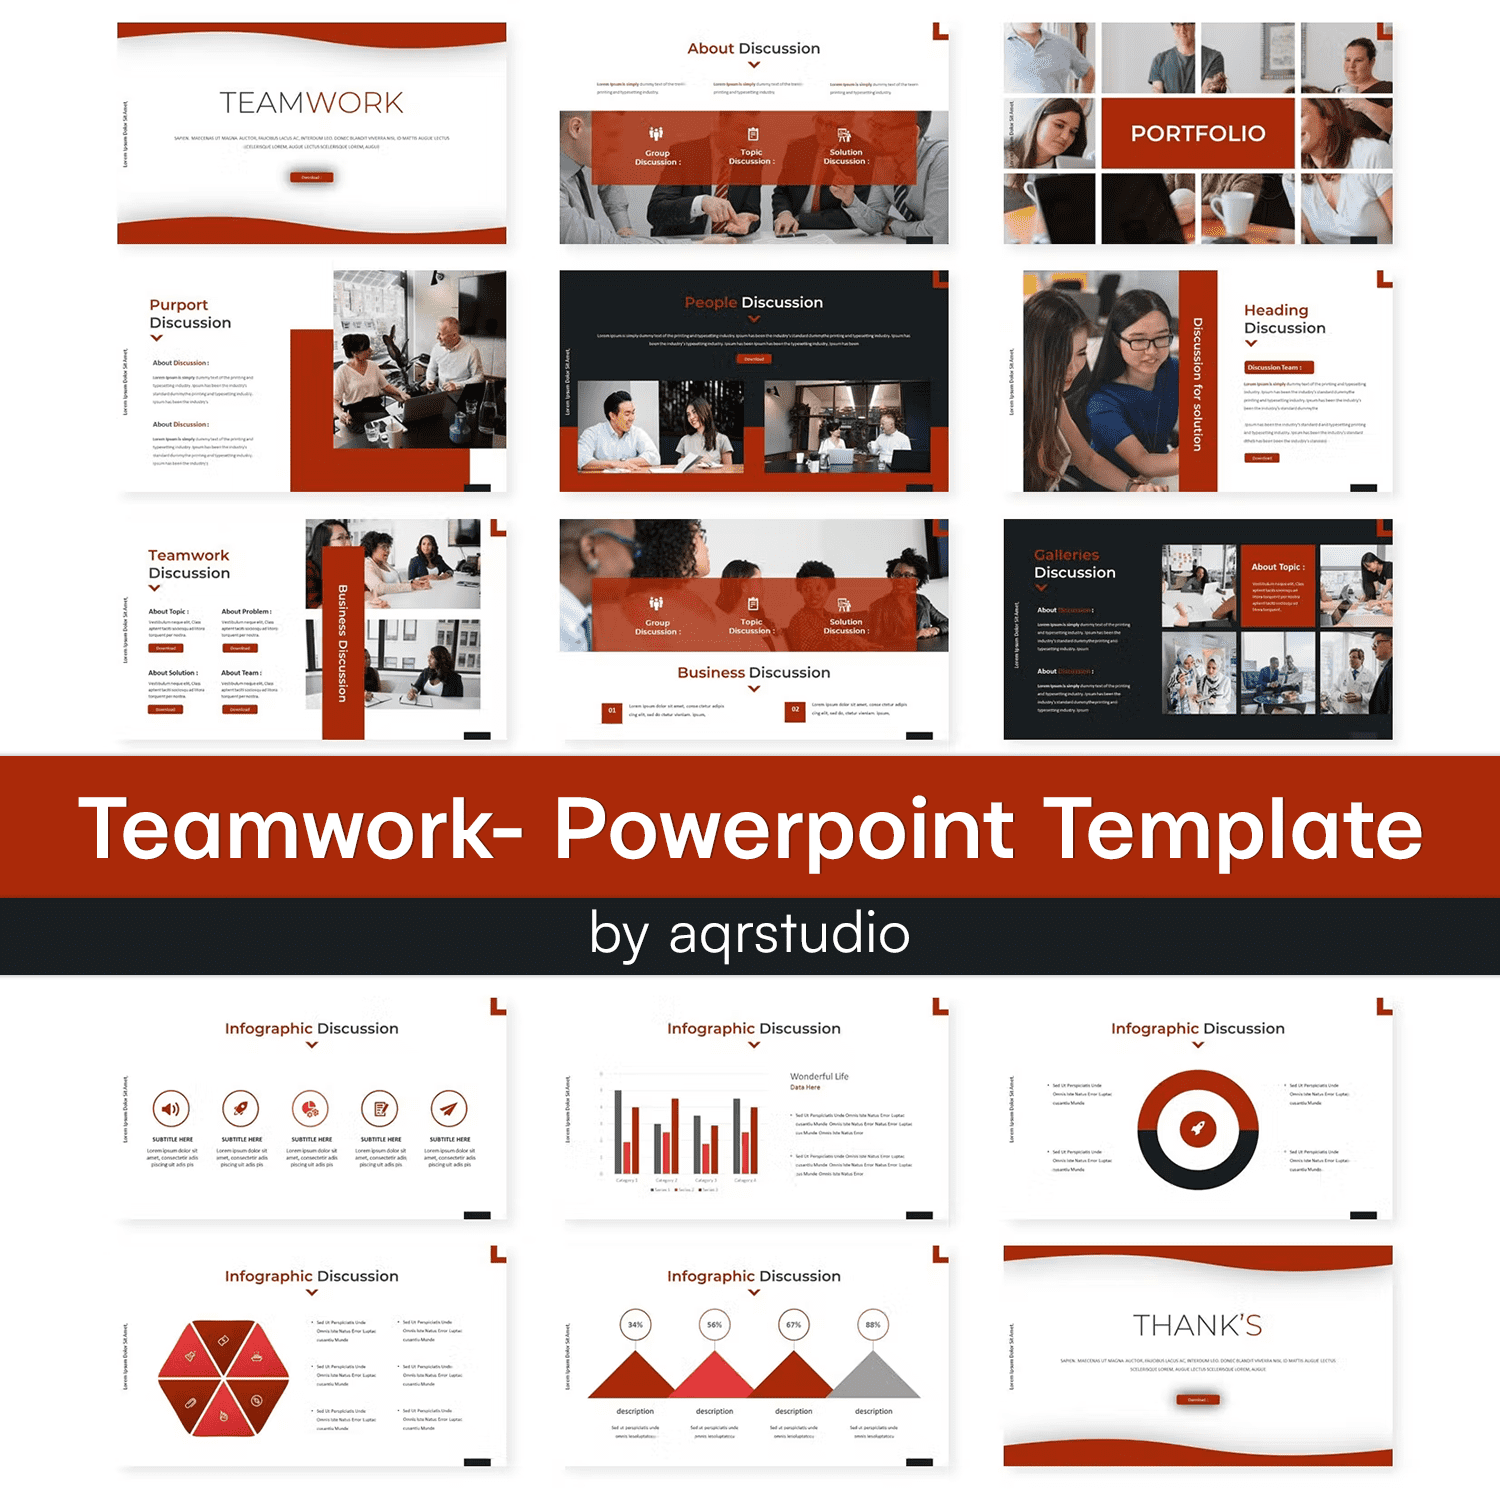 Infographic discussion of the Teamwork Business Presentation Template.